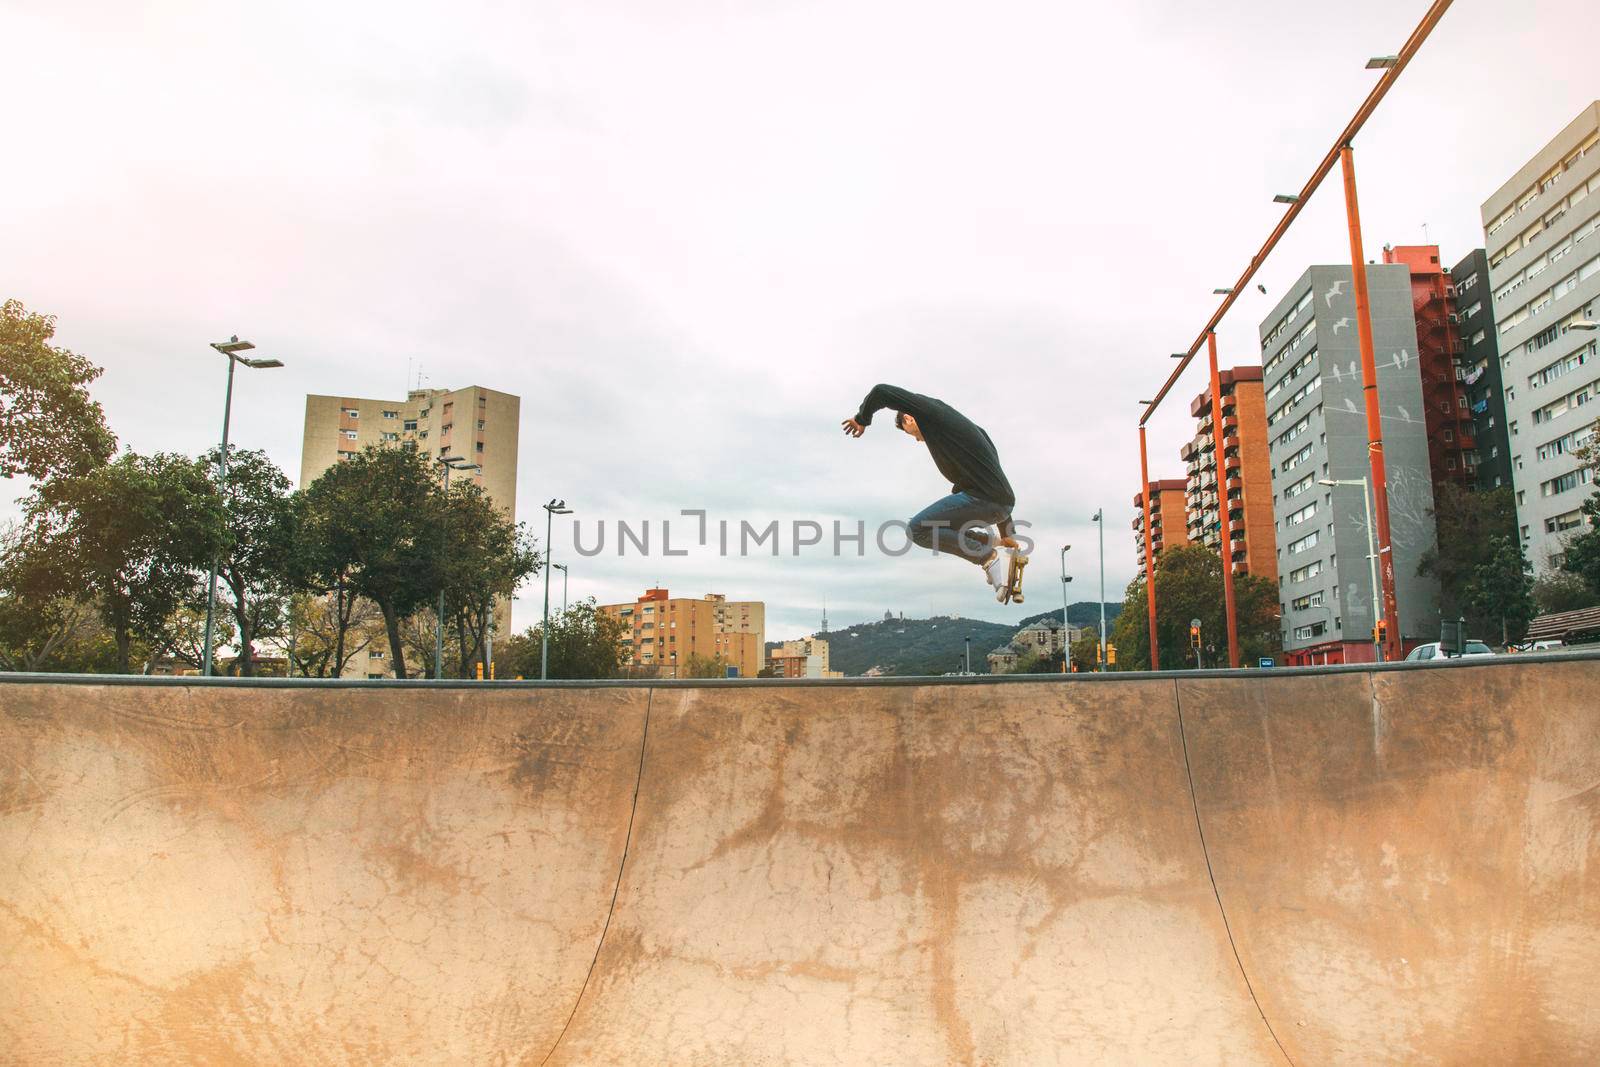 skater jumping high in the air with a snakeboard in a skatepark with white sky and buildings in the background with copyspace